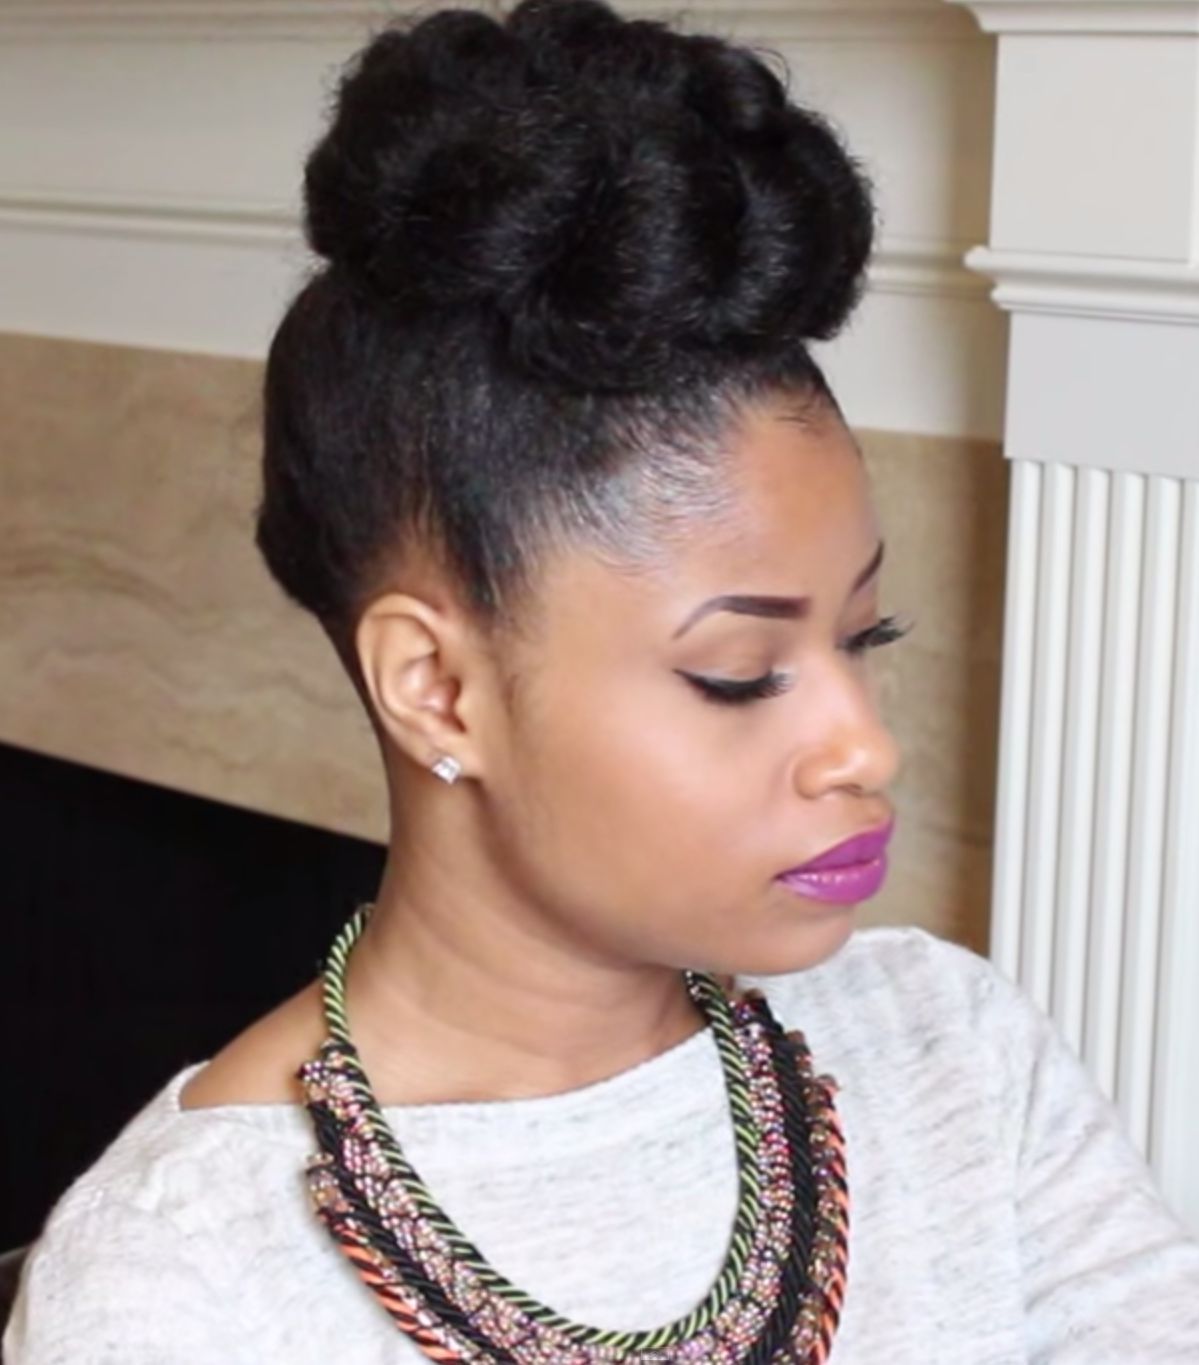 zahirziani - Casual French twist for the Holidays brings a... | Facebook